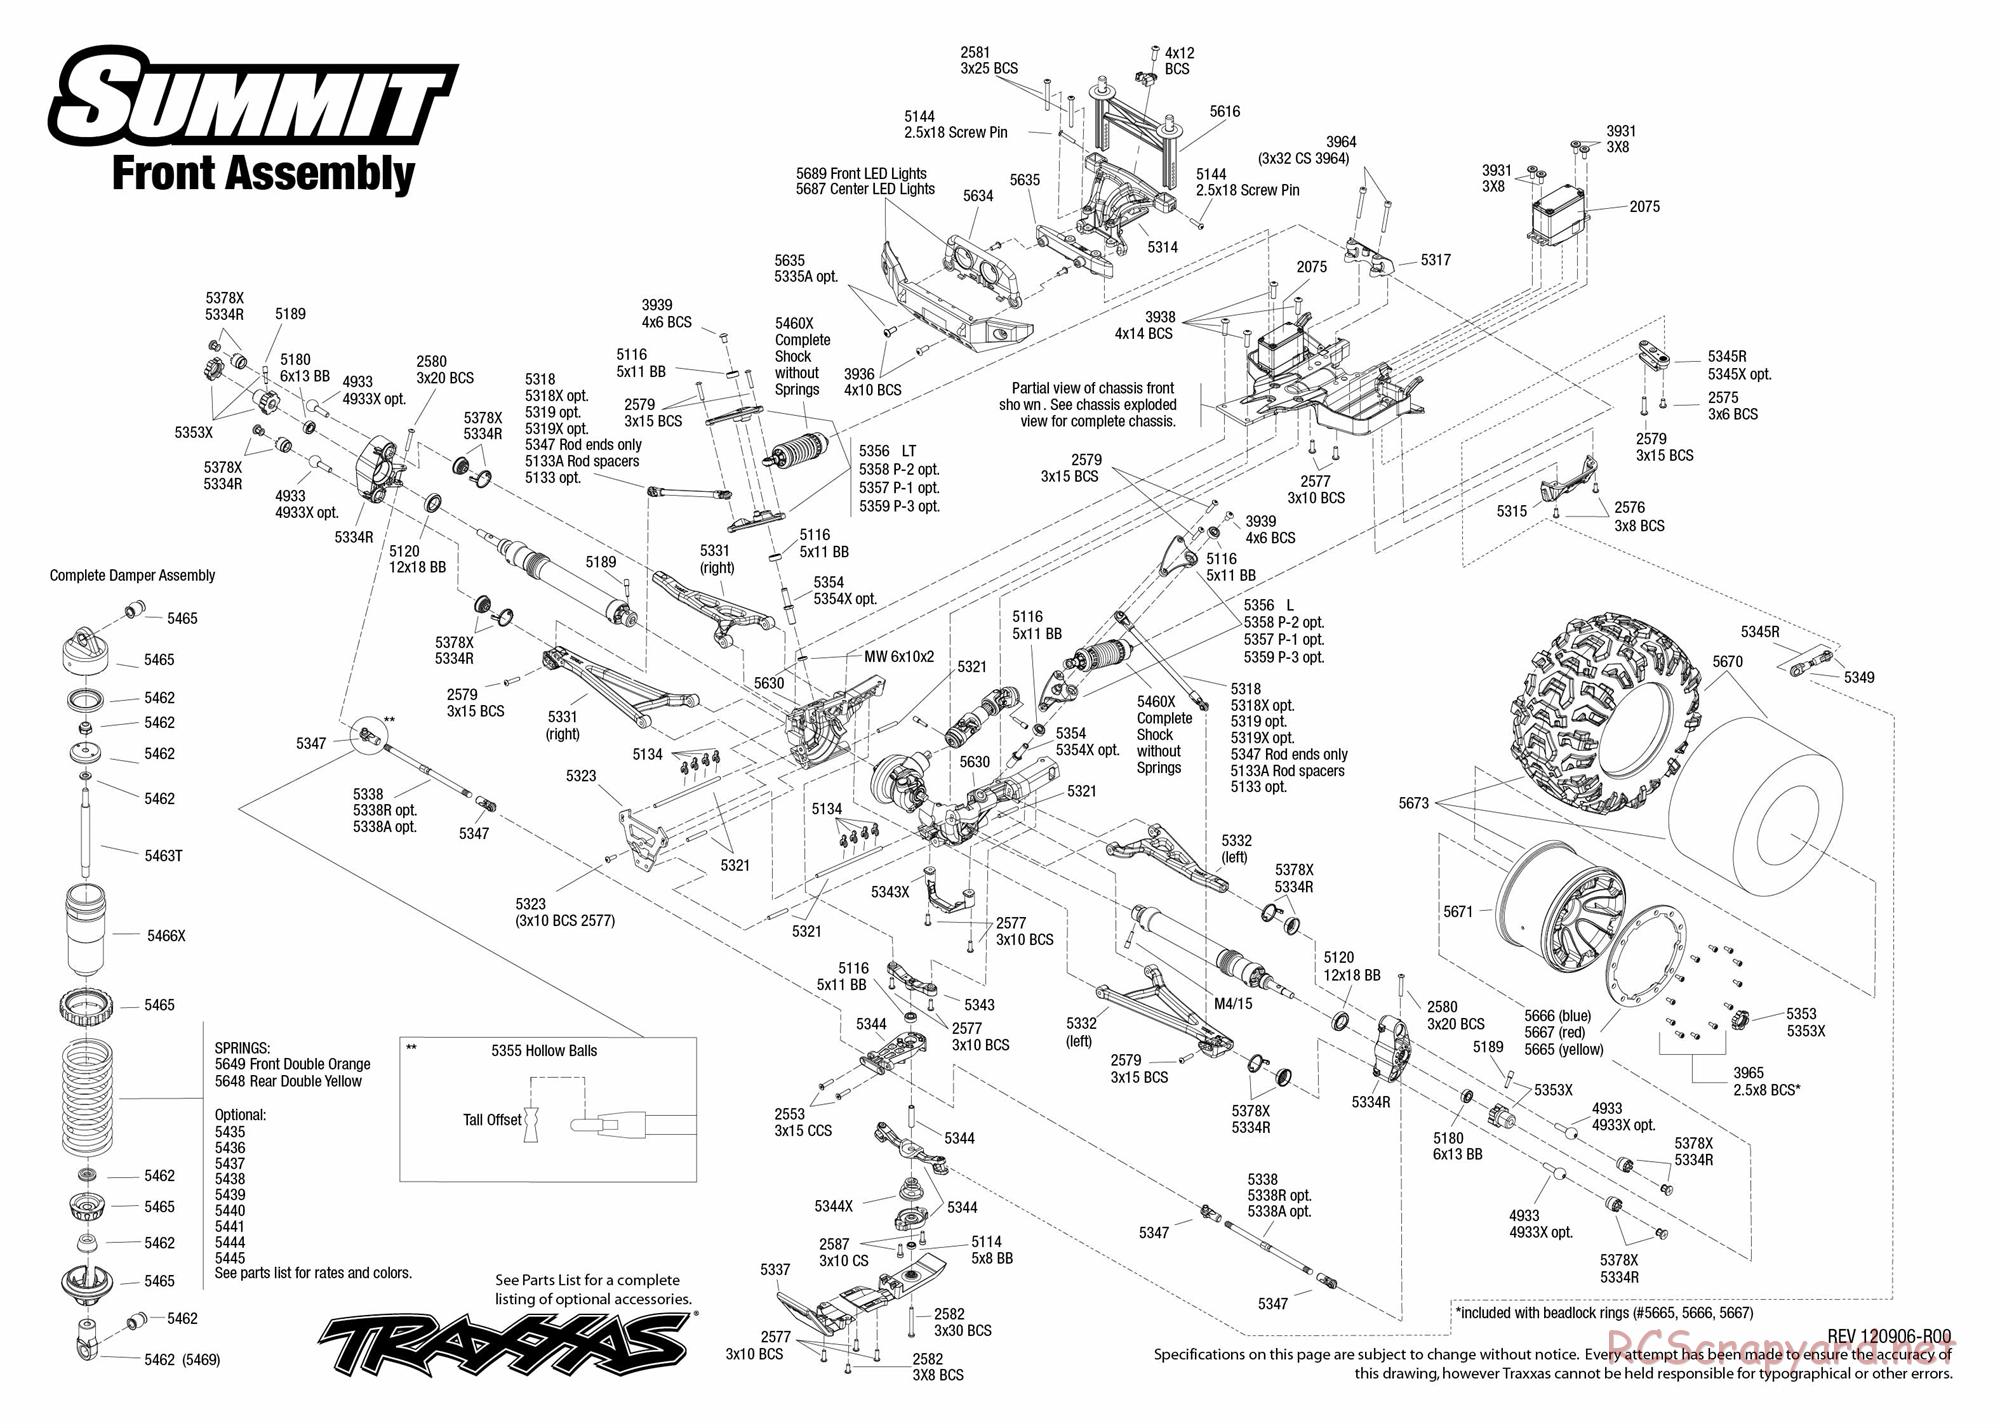 Traxxas - Summit LiPo (2012) - Exploded Views - Page 3